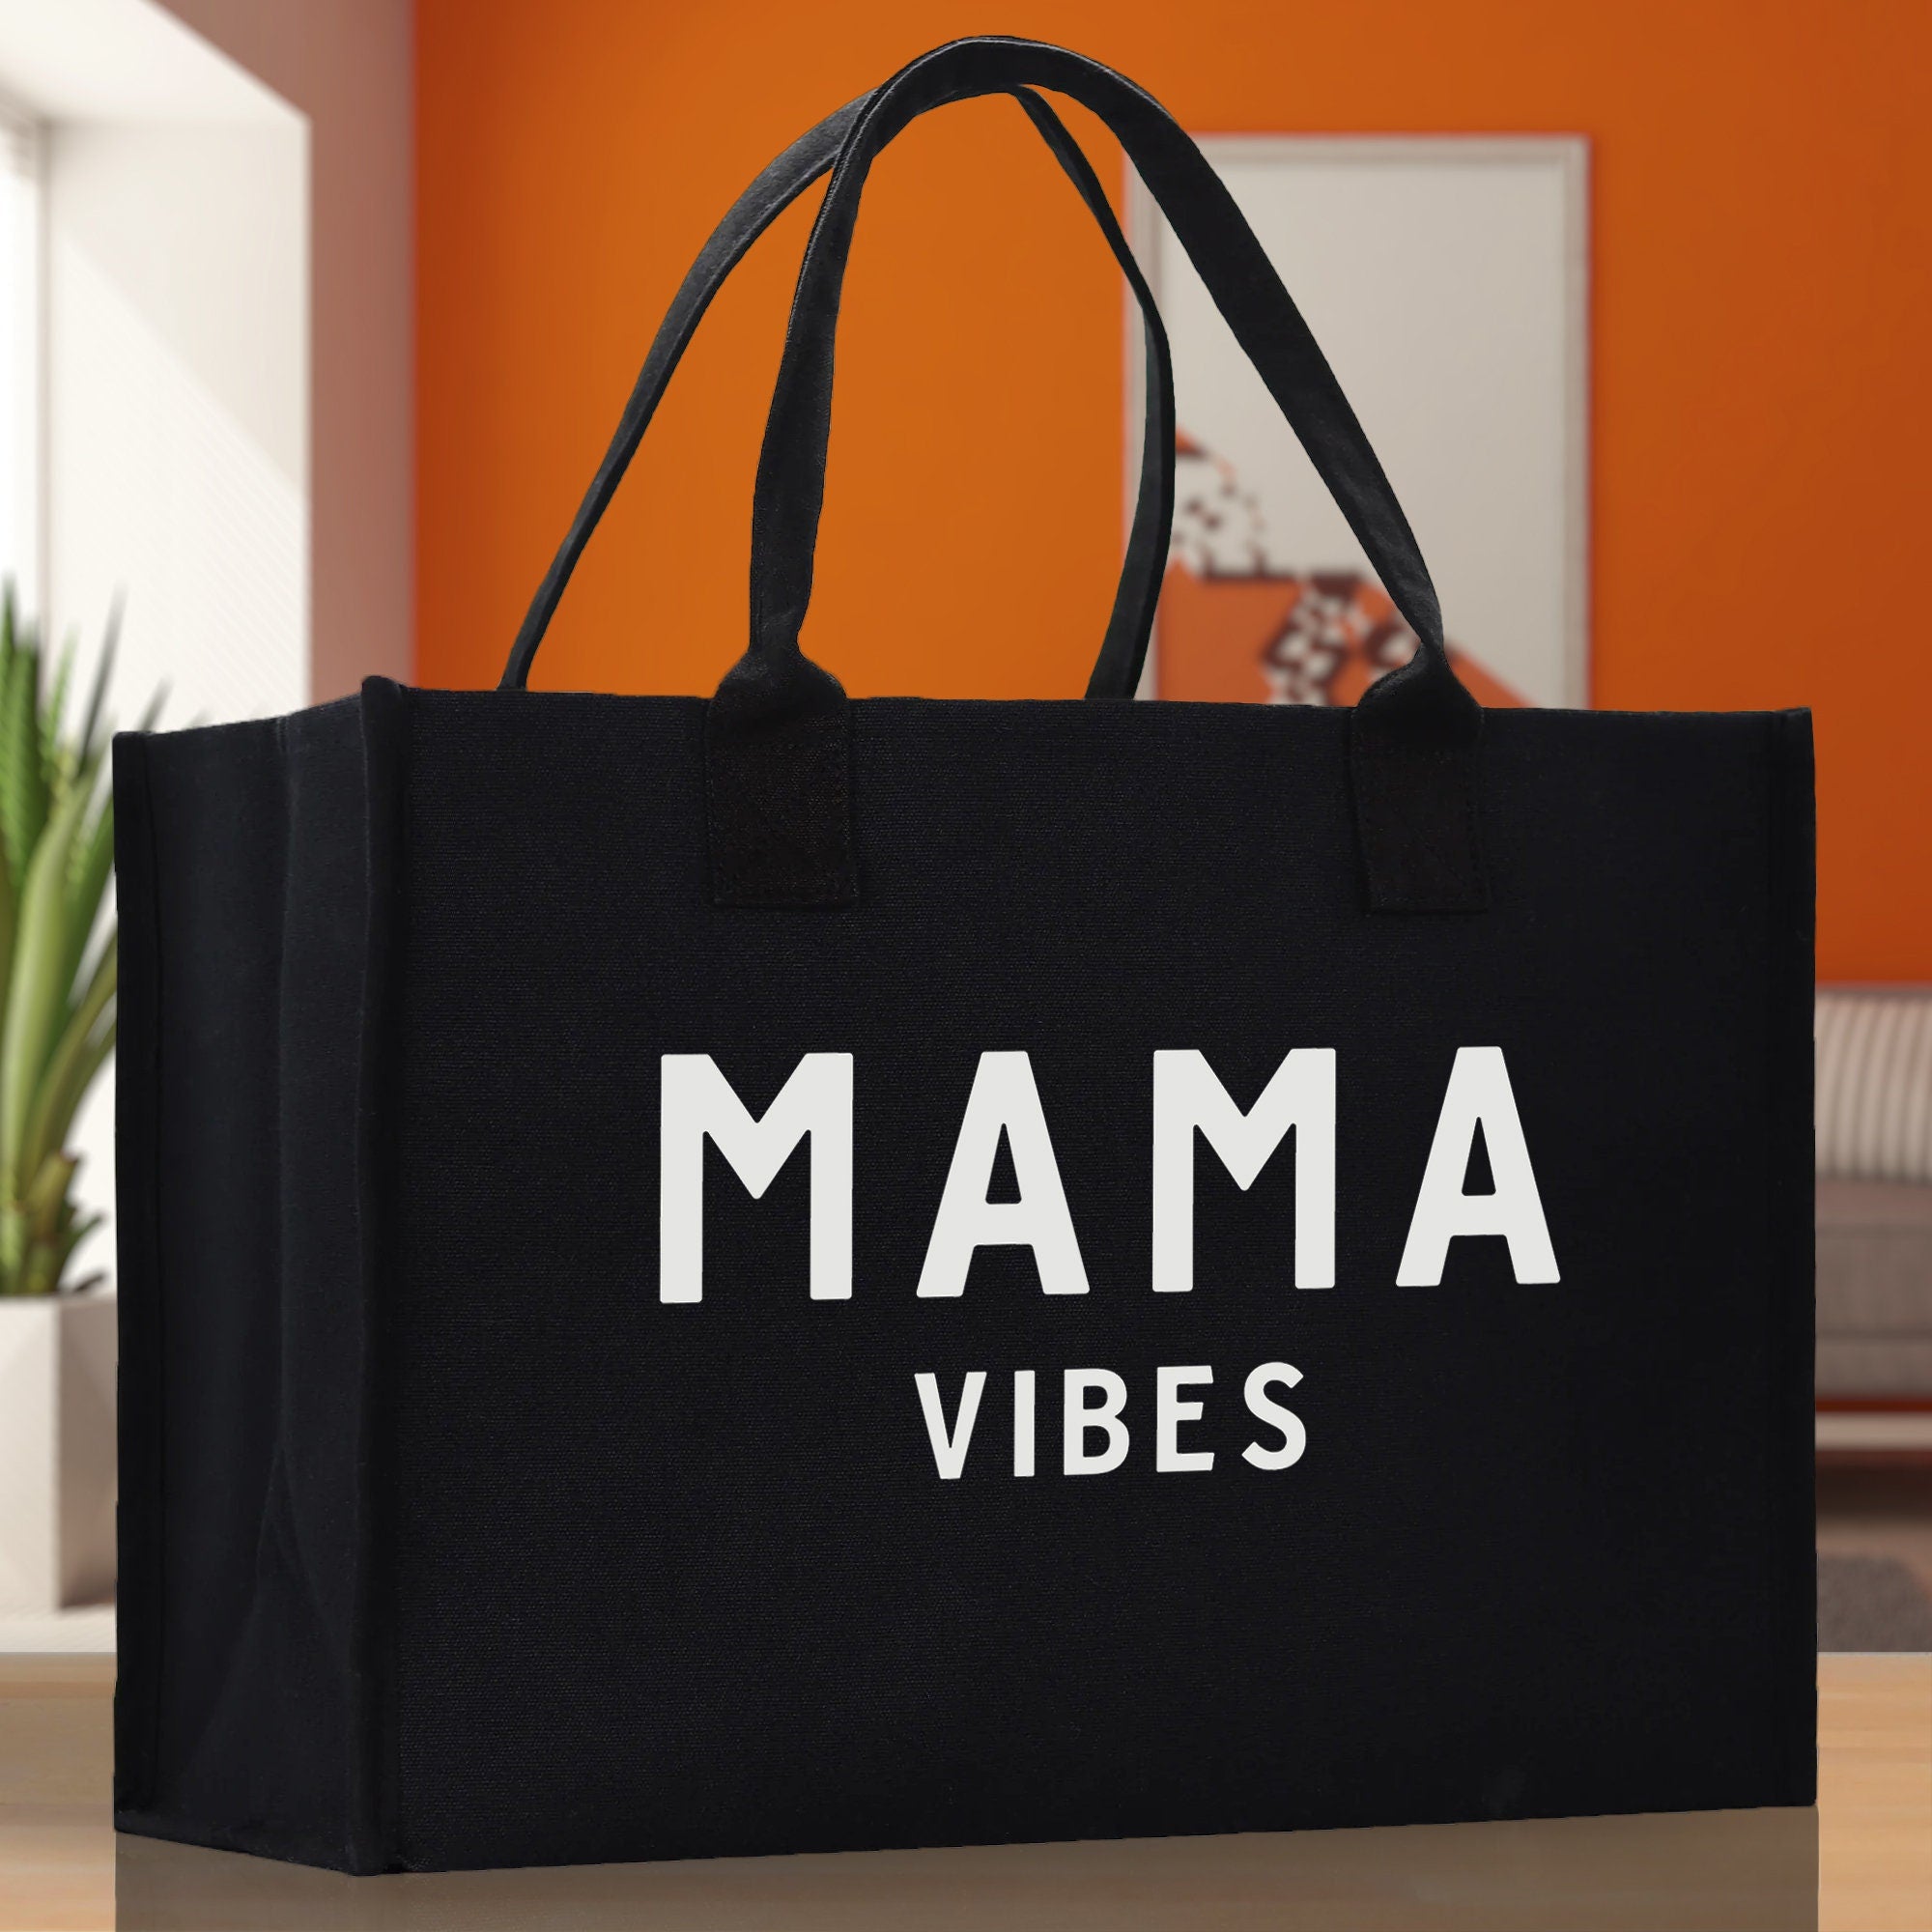 Mama Vibes Cotton Canvas Chic Beach Tote Bag Multipurpose Tote Weekender Tote Gift for Her Outdoor Tote Vacation Tote Large Beach Bag